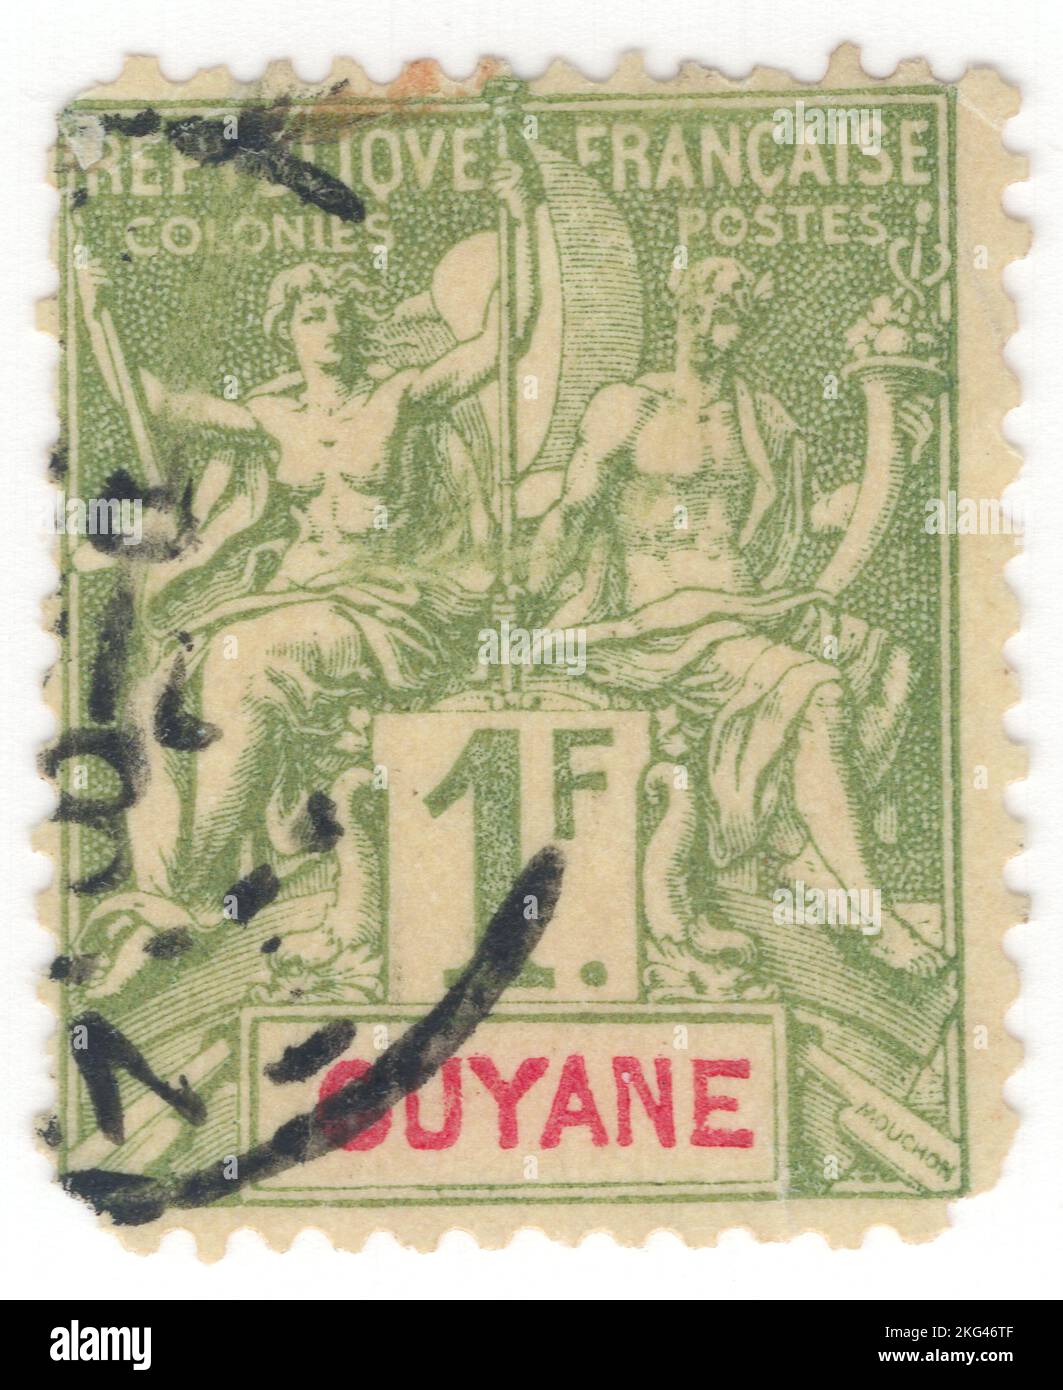 FRENCH GUIANA - 1892: An 1 franc brown-green on straw postage stamp depicting Couple of ancient God and Goddess as allegory Navigation and Commerce. Name of Colony in Blue or Carmine, 'Tablet' key-type inscribed 'GUYANE'. Allegory 'Navigation and Commerce' was designed by Louis-Eugene Mouchon. The Navigation and Commerce issue is a series of key type stamps issued for the colonial territories of France Stock Photo